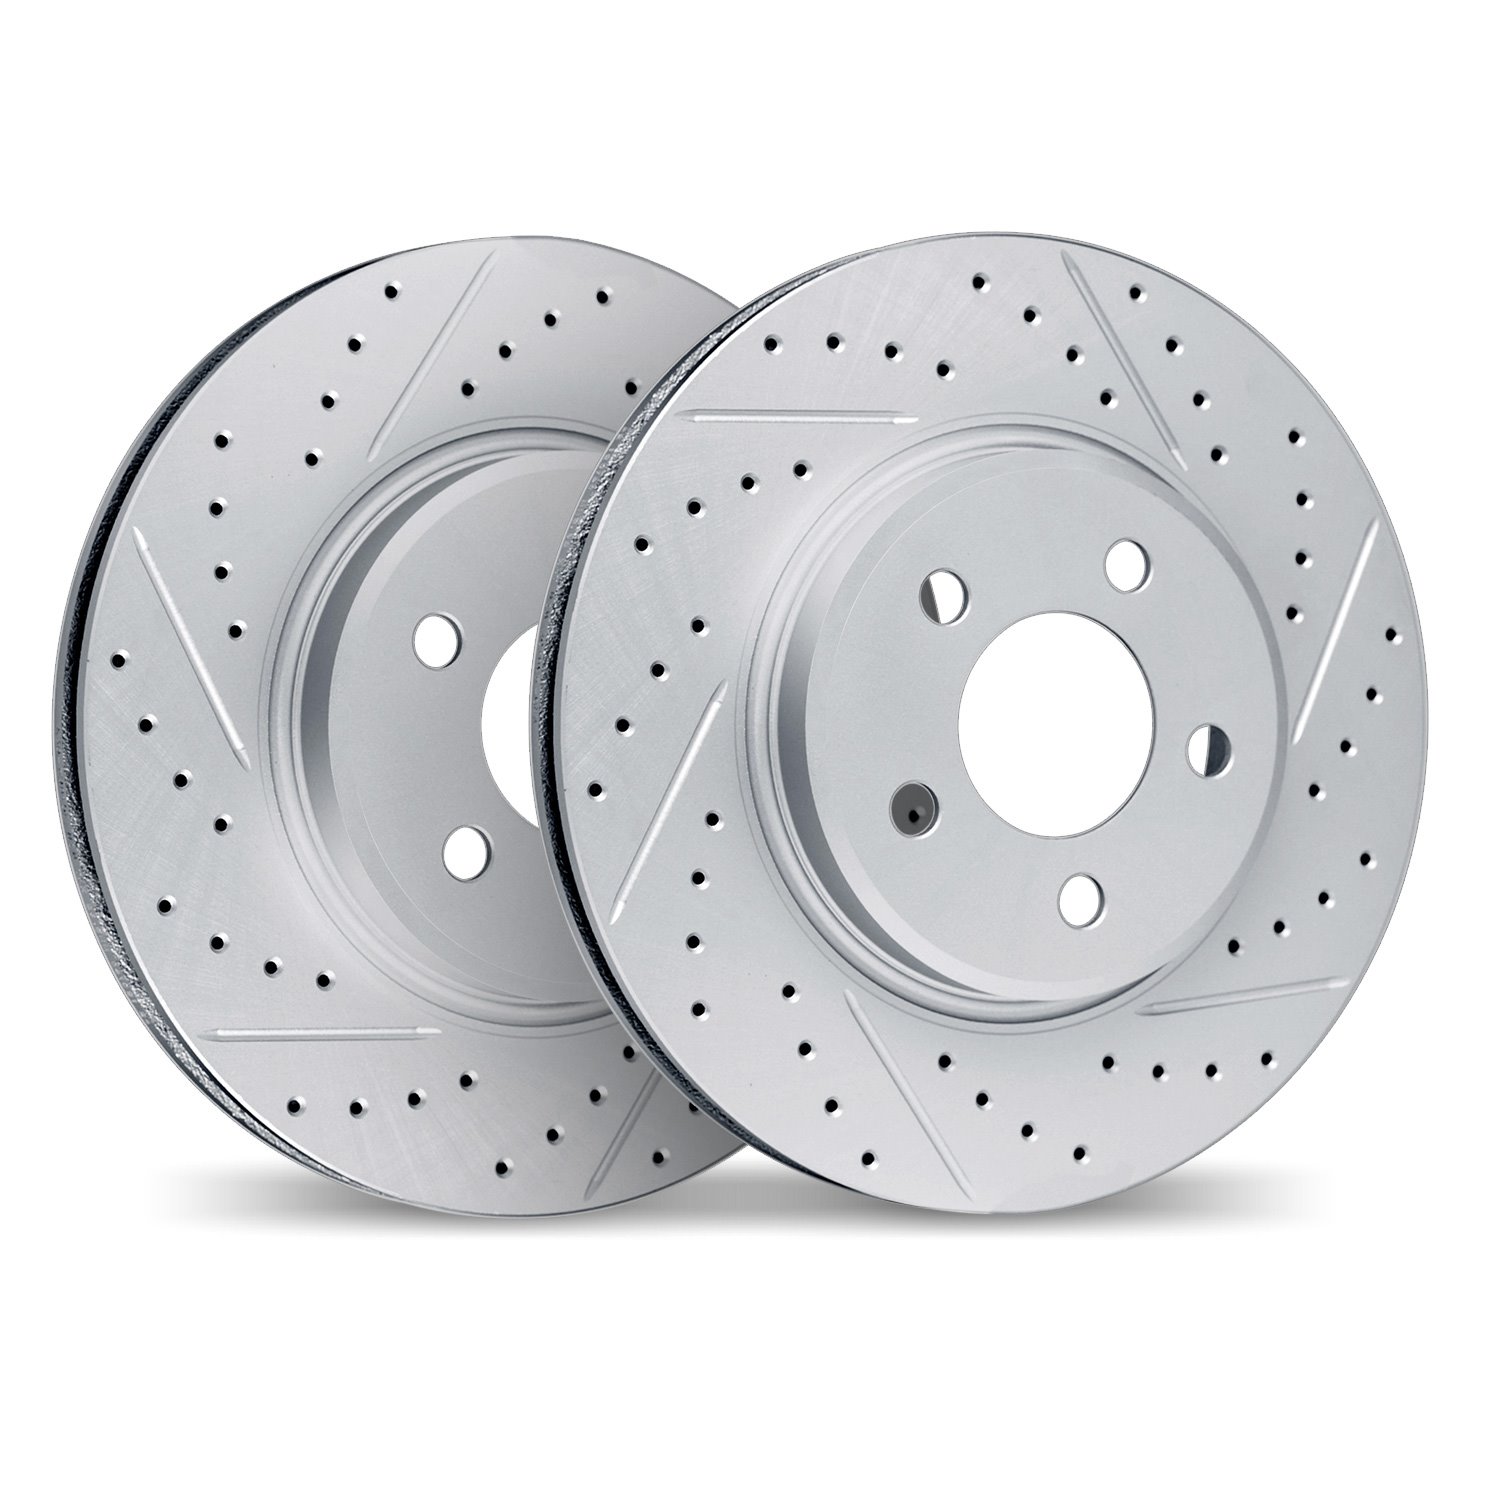 2002-63080 Geoperformance Drilled/Slotted Brake Rotors, Fits Select Mercedes-Benz, Position: Rear